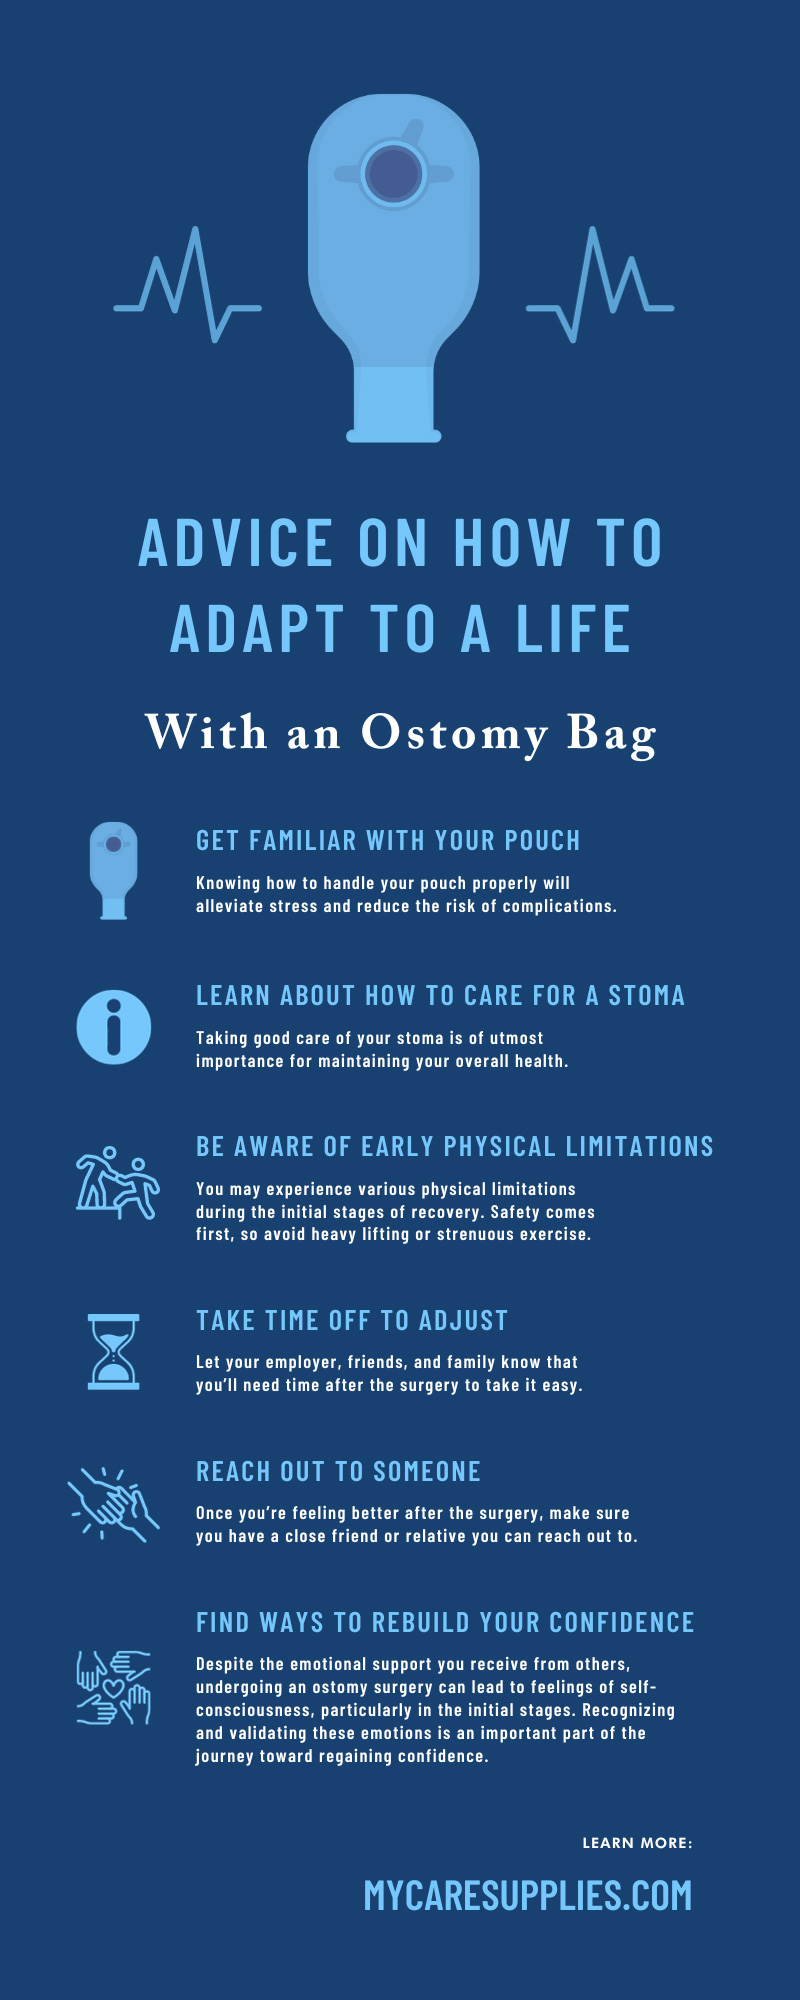 Advice on How To Adapt to a Life With an Ostomy Bag